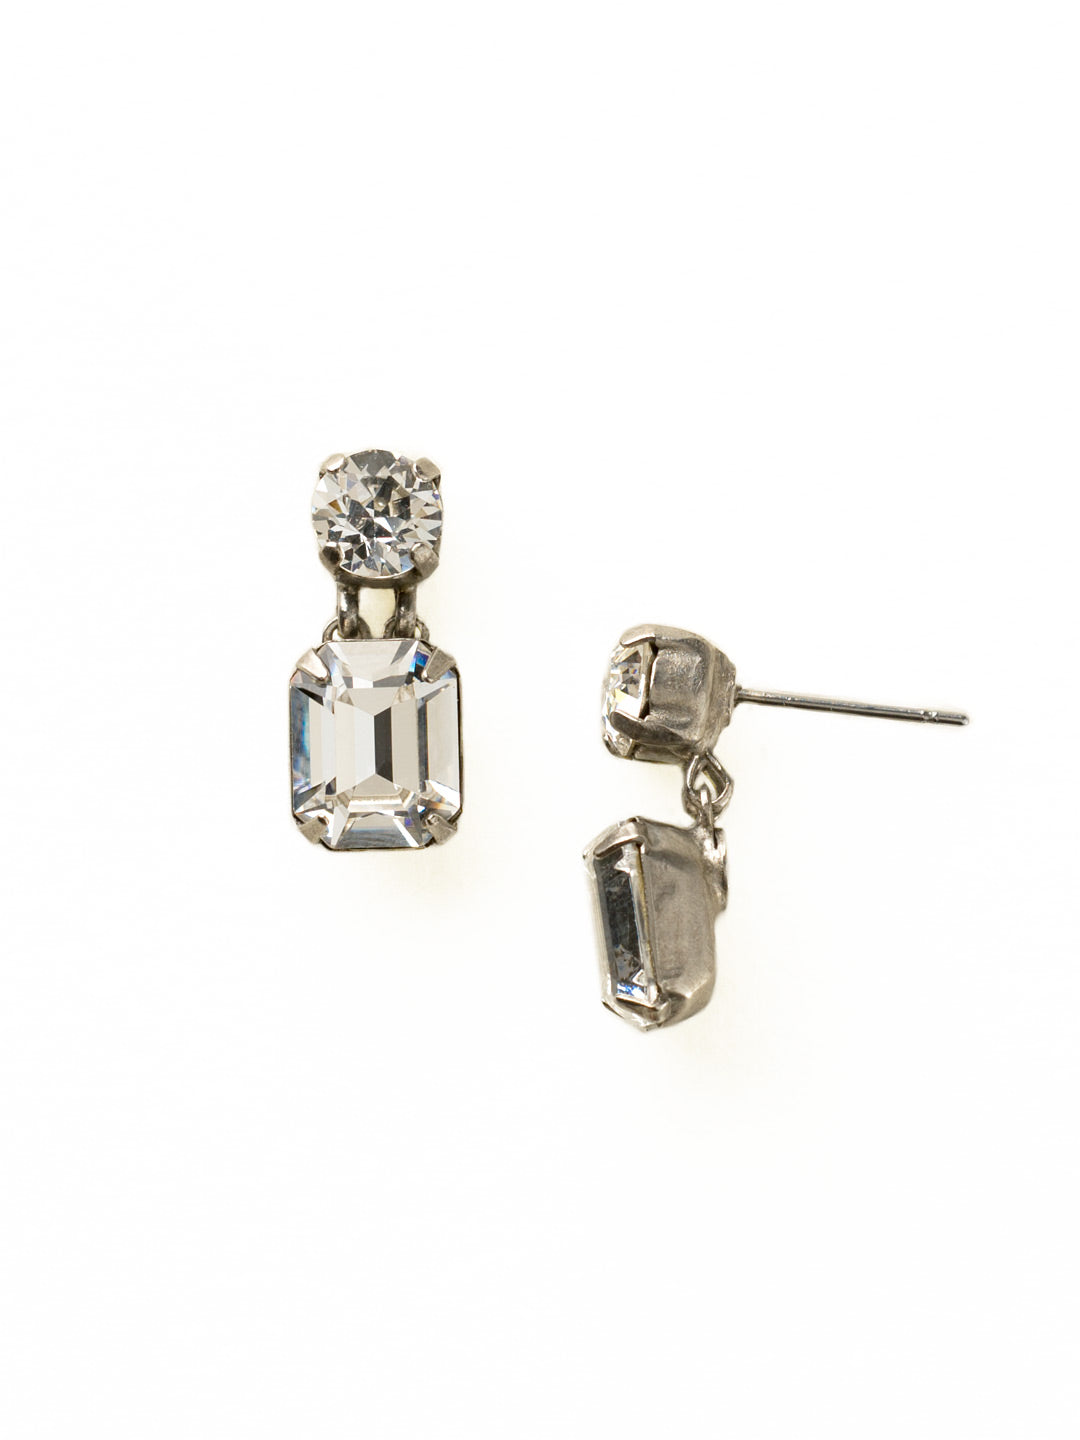 Crystal Octagon and Round Stud Earrings - ECW7ASCRY - <p>We took a classic post earring and gave it that little bit of needed dimension! These earrings feature a sleek octagon attached to a round crystal post. They pair perfectly with our Crystal Octagon Classic necklace. From Sorrelli's Crystal collection in our Antique Silver-tone finish.</p>